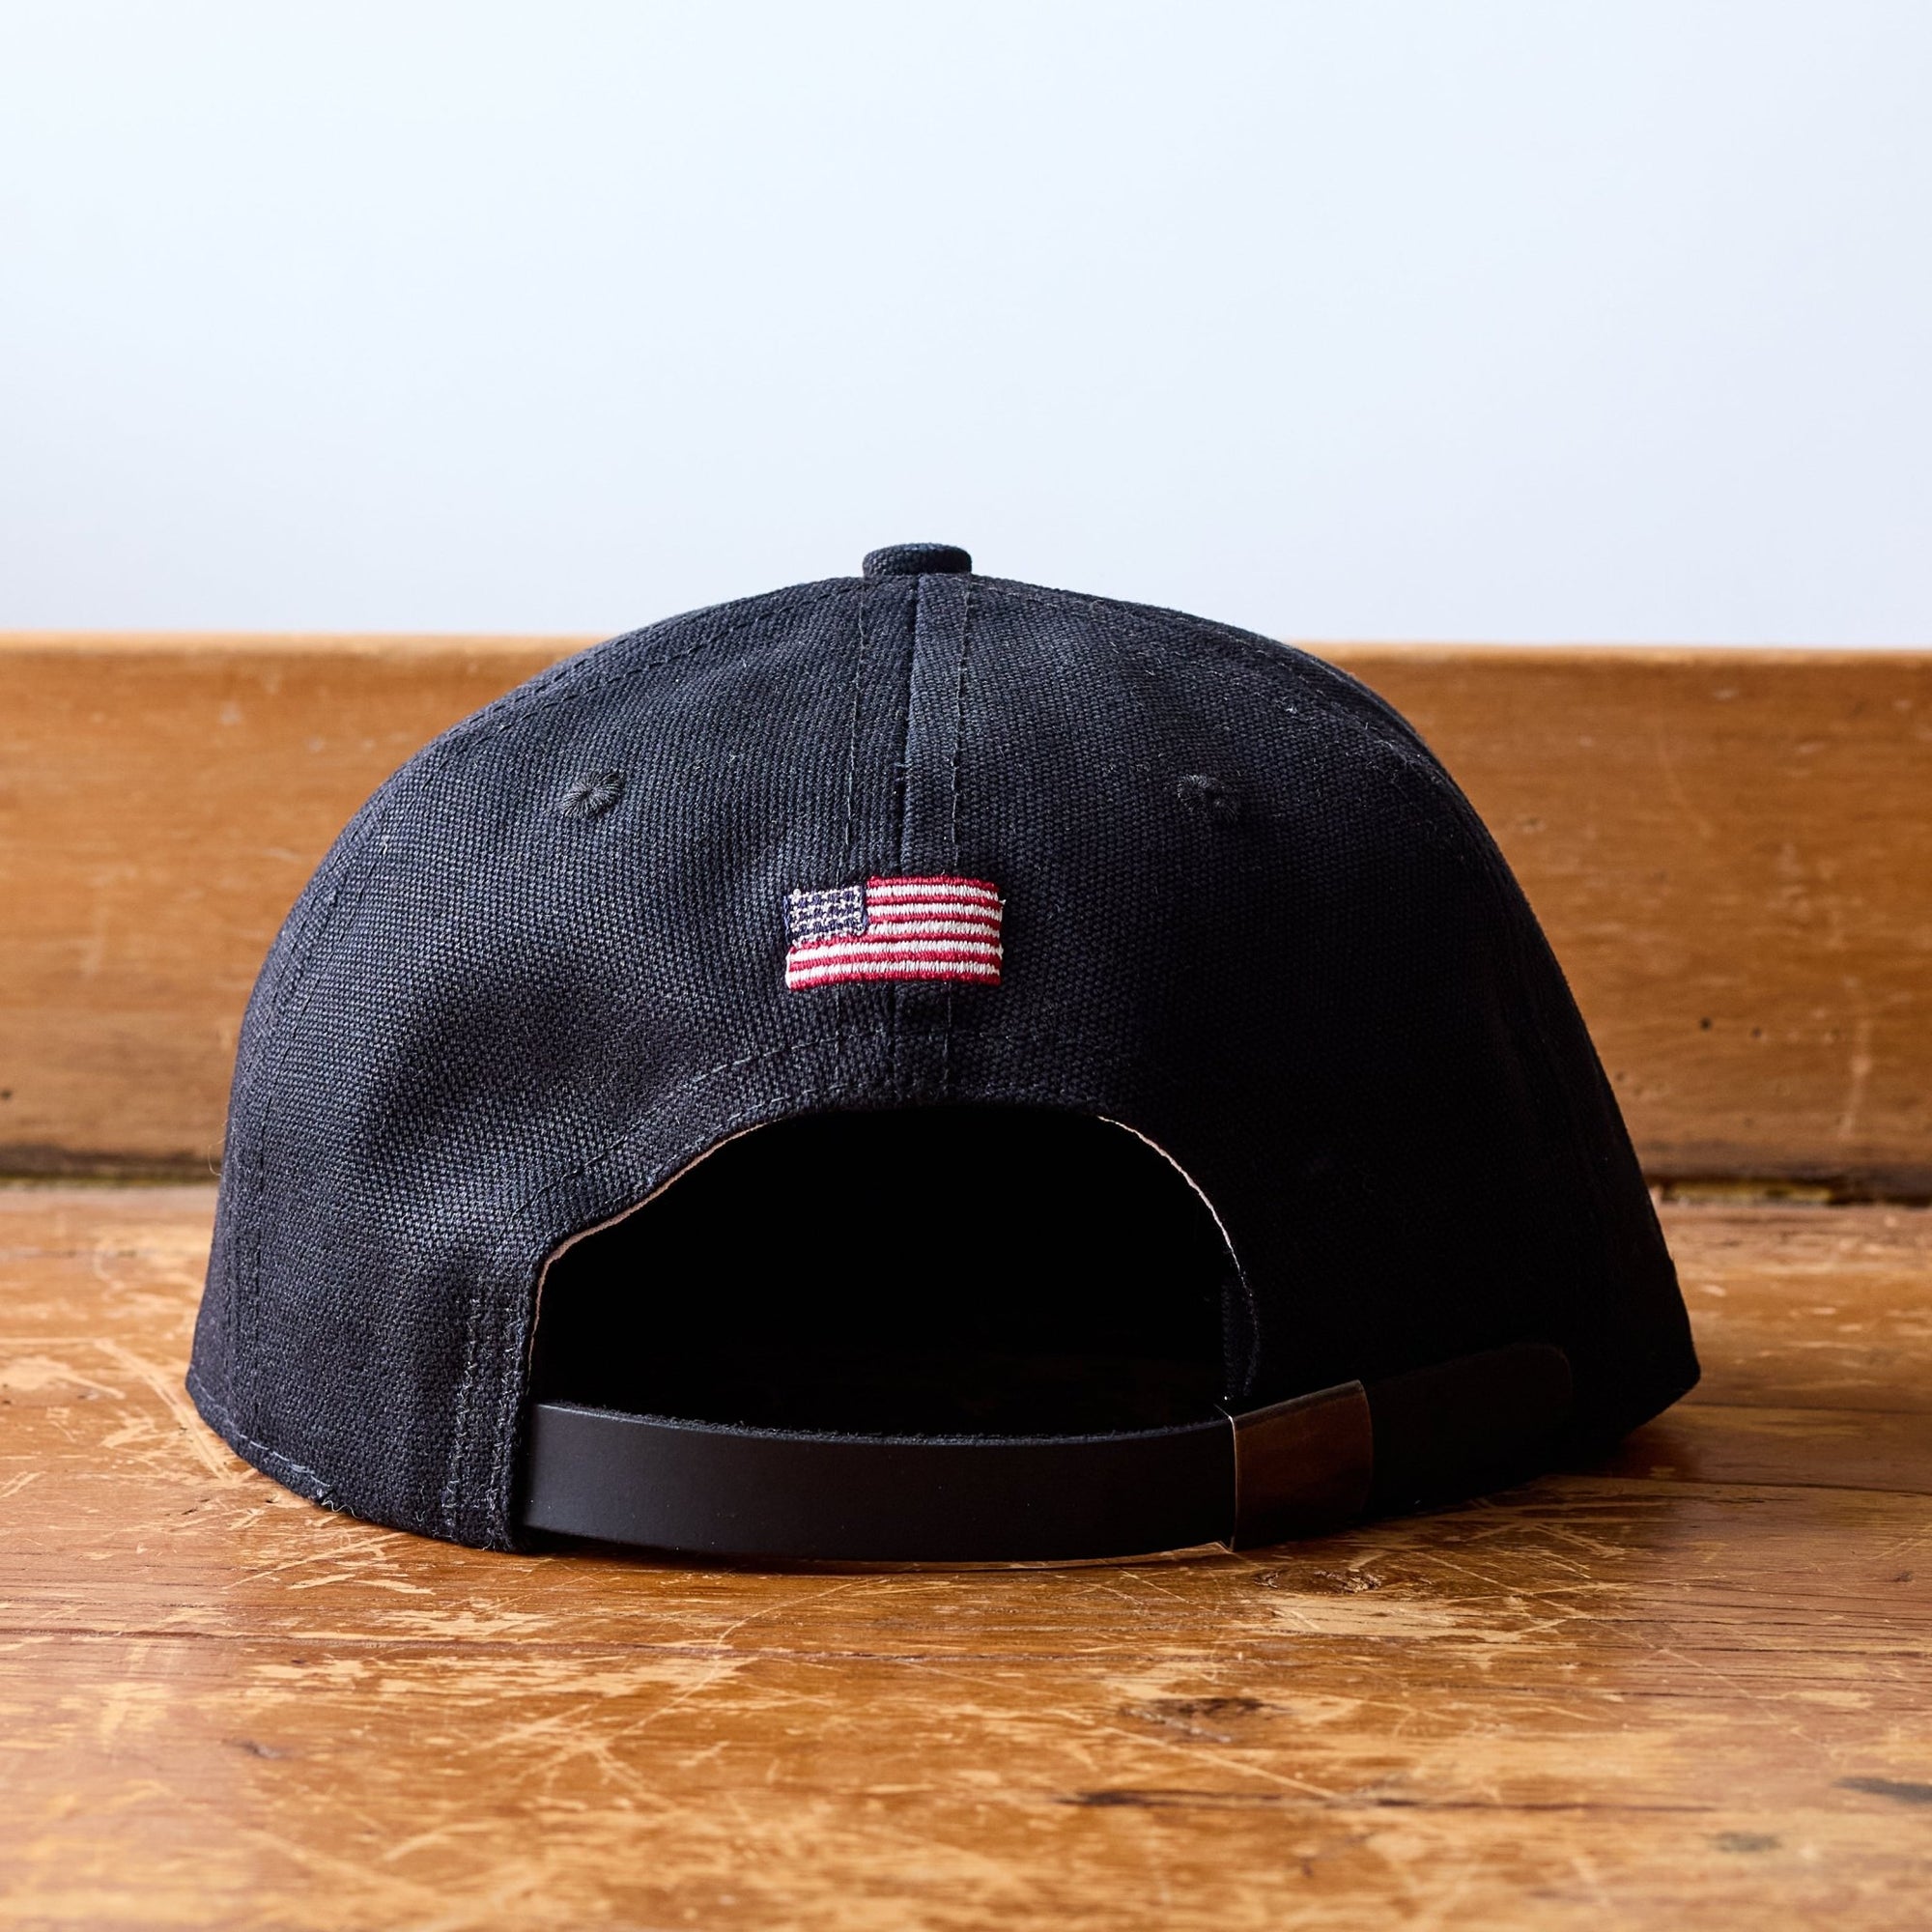 GS x Ebbets Field Flannels Cotton Canvas Hat: Black / White NY - grown&sewn